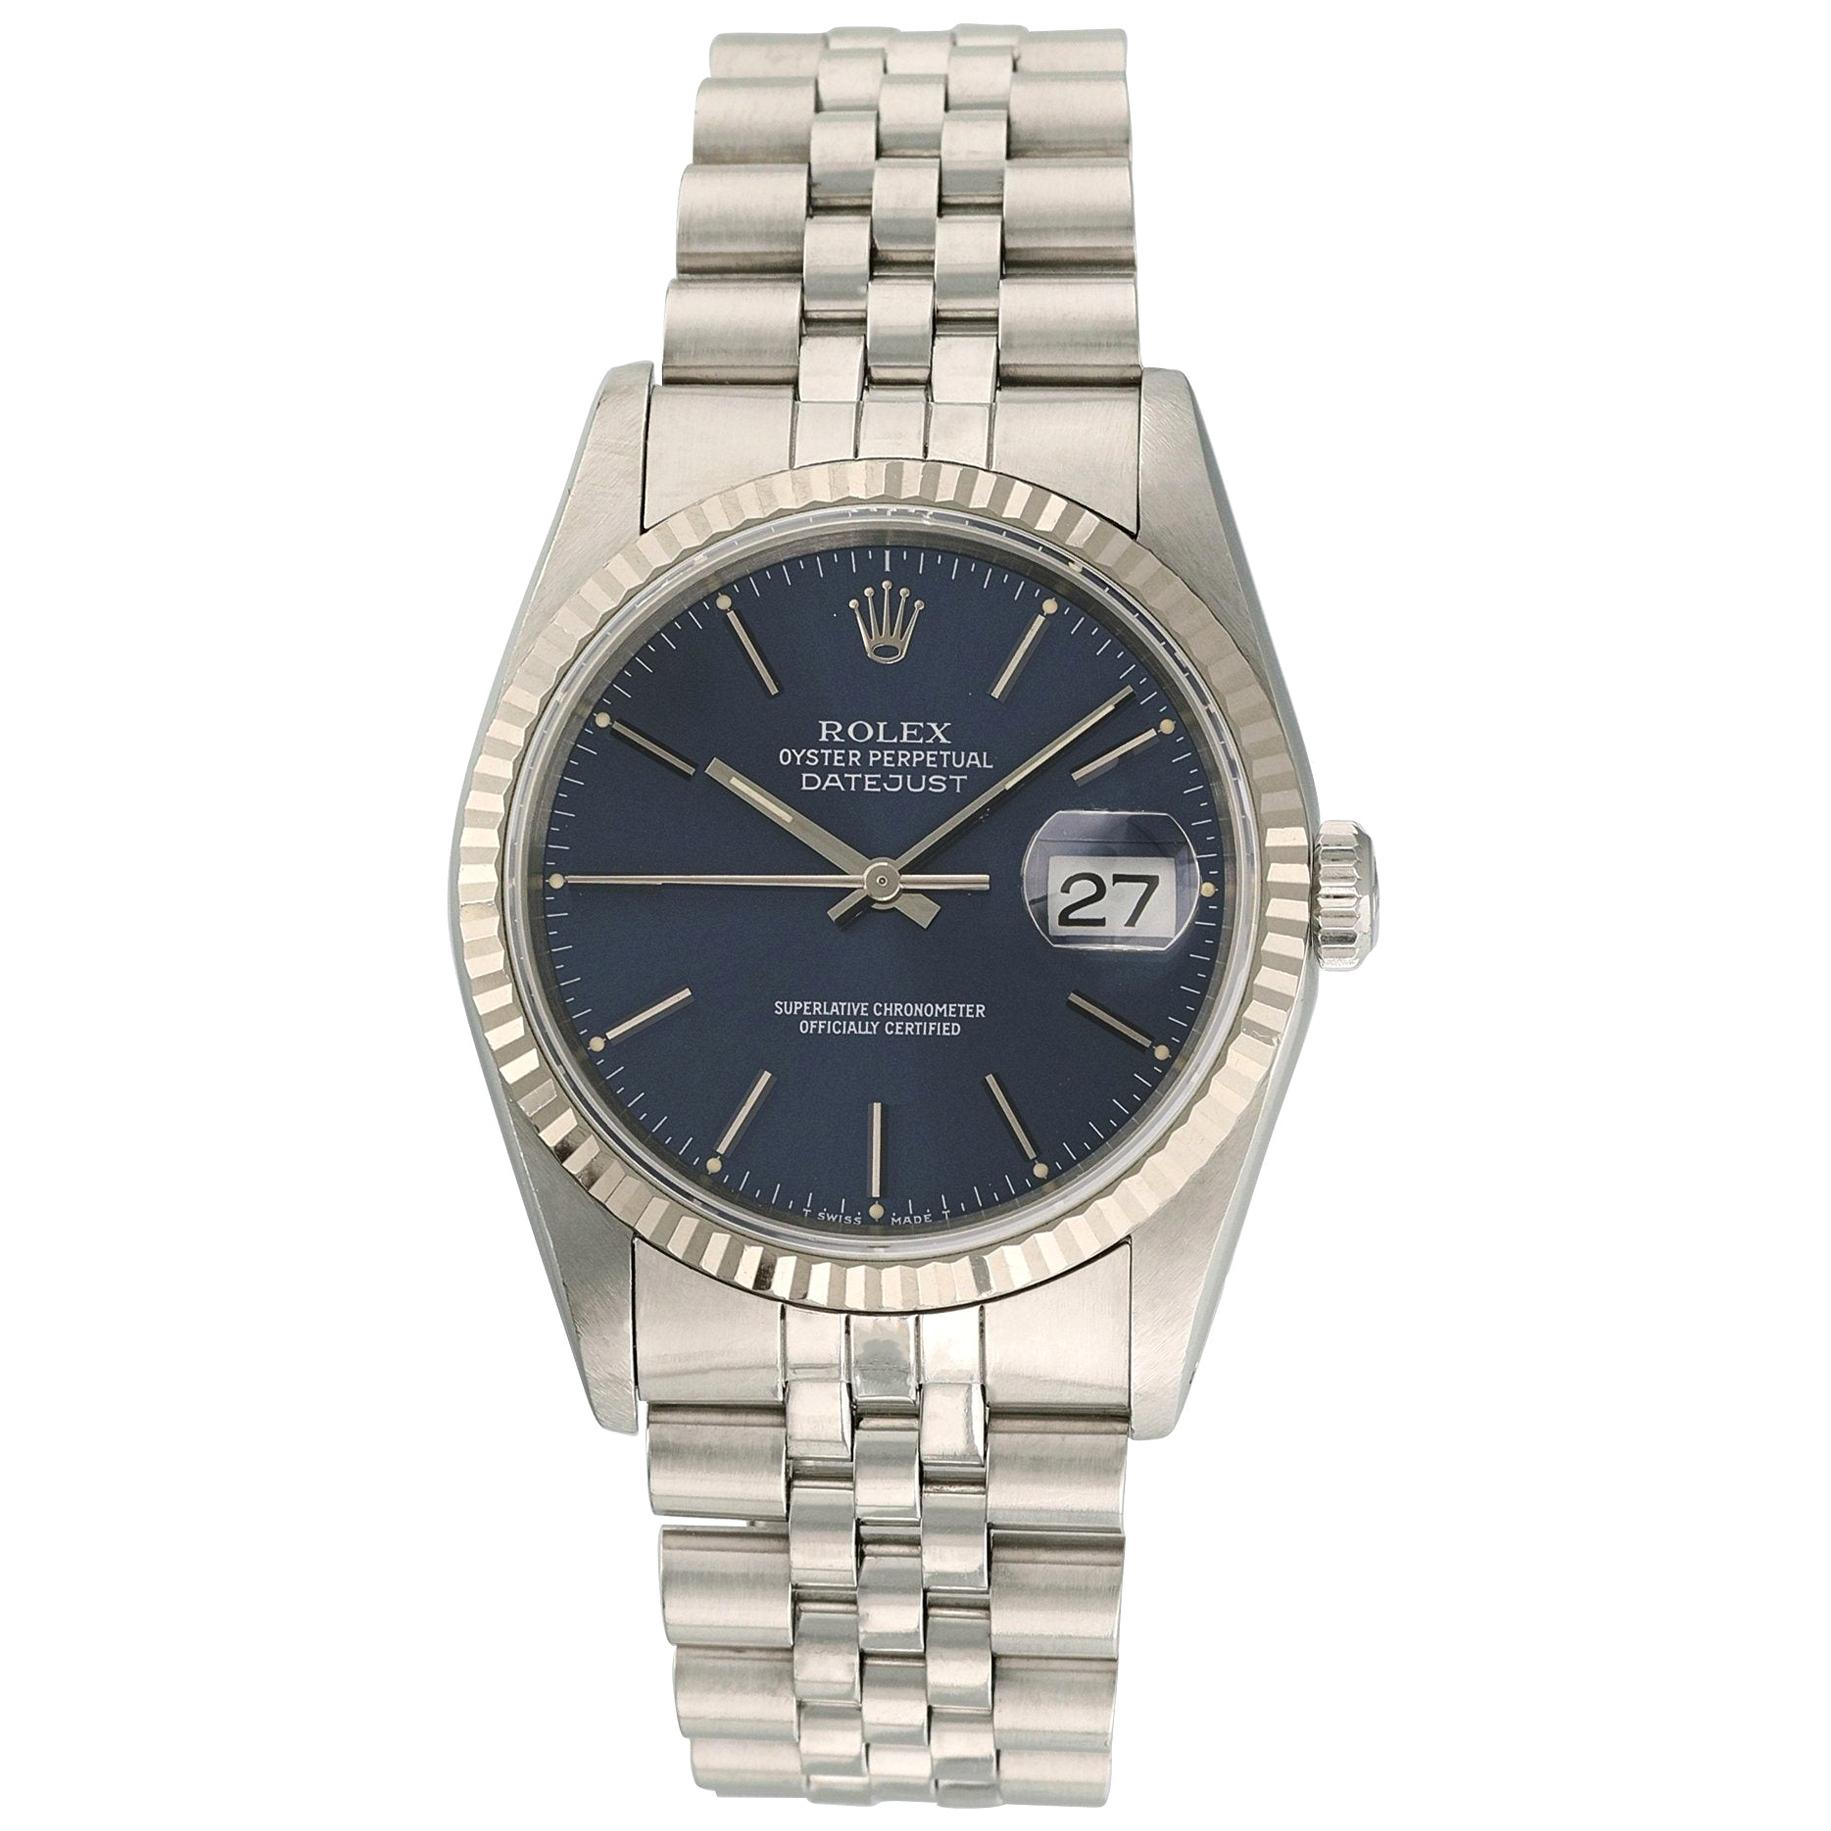 Rolex Datejust 16234 Men Watch. 
36mm Stainless Steel case. 
White Gold fluted bezel. 
Black dial.
Minute markers on the outer dial. 
Date display at the 3 o'clock position. 
Stainless Steel jubilee Bracelet with Fold Over Clasp. 
Will fit up to a